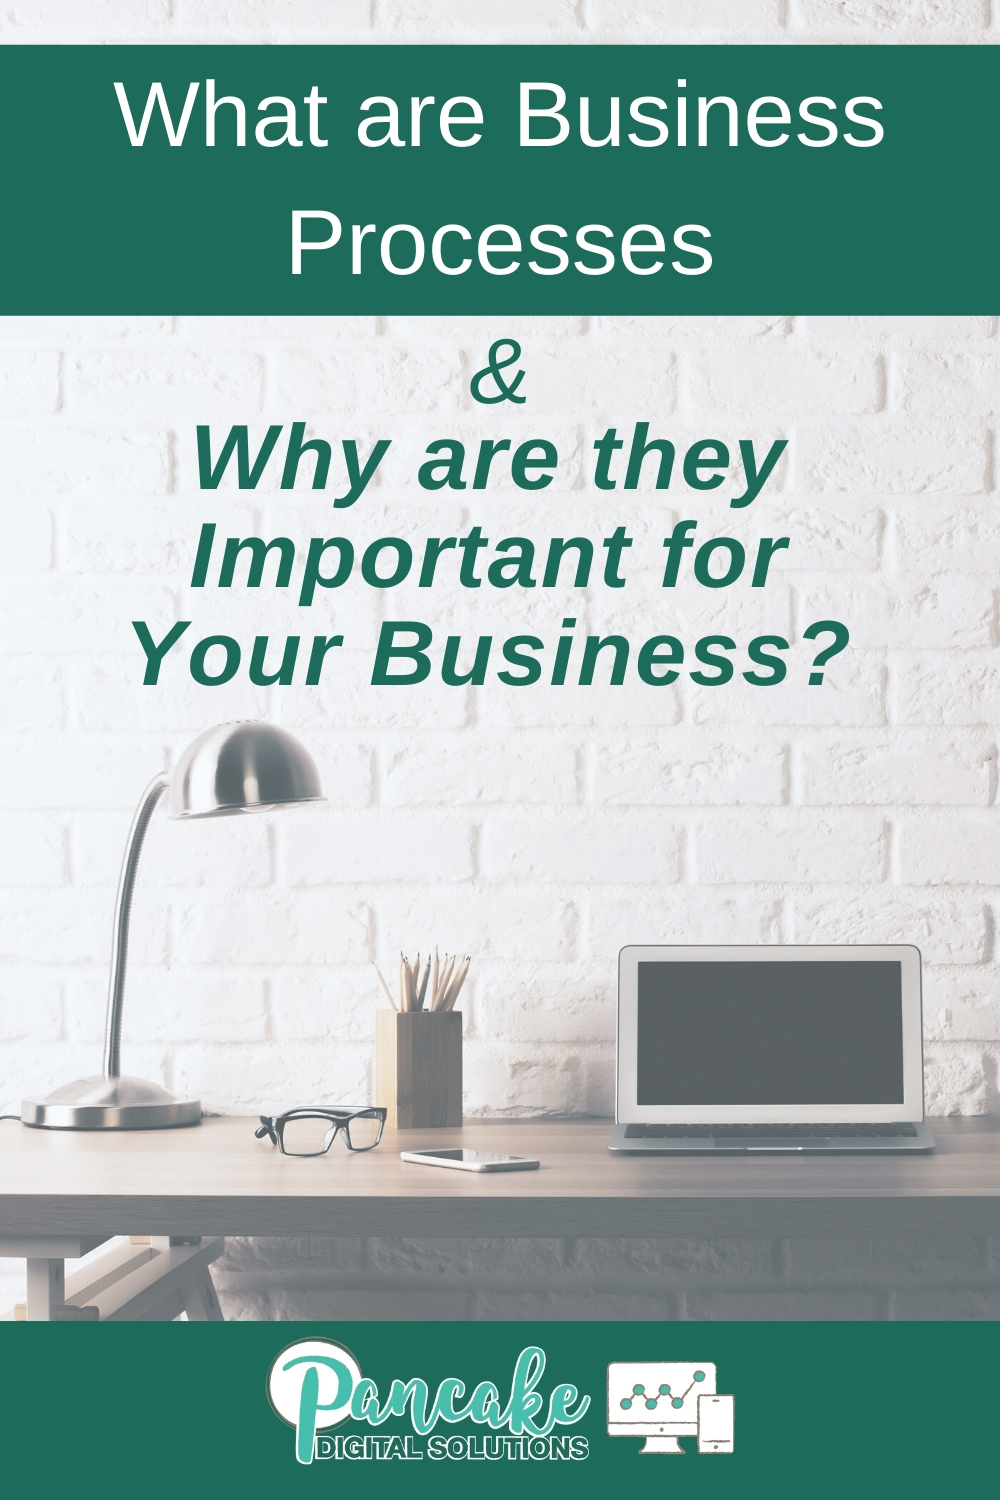 What are Business Processes